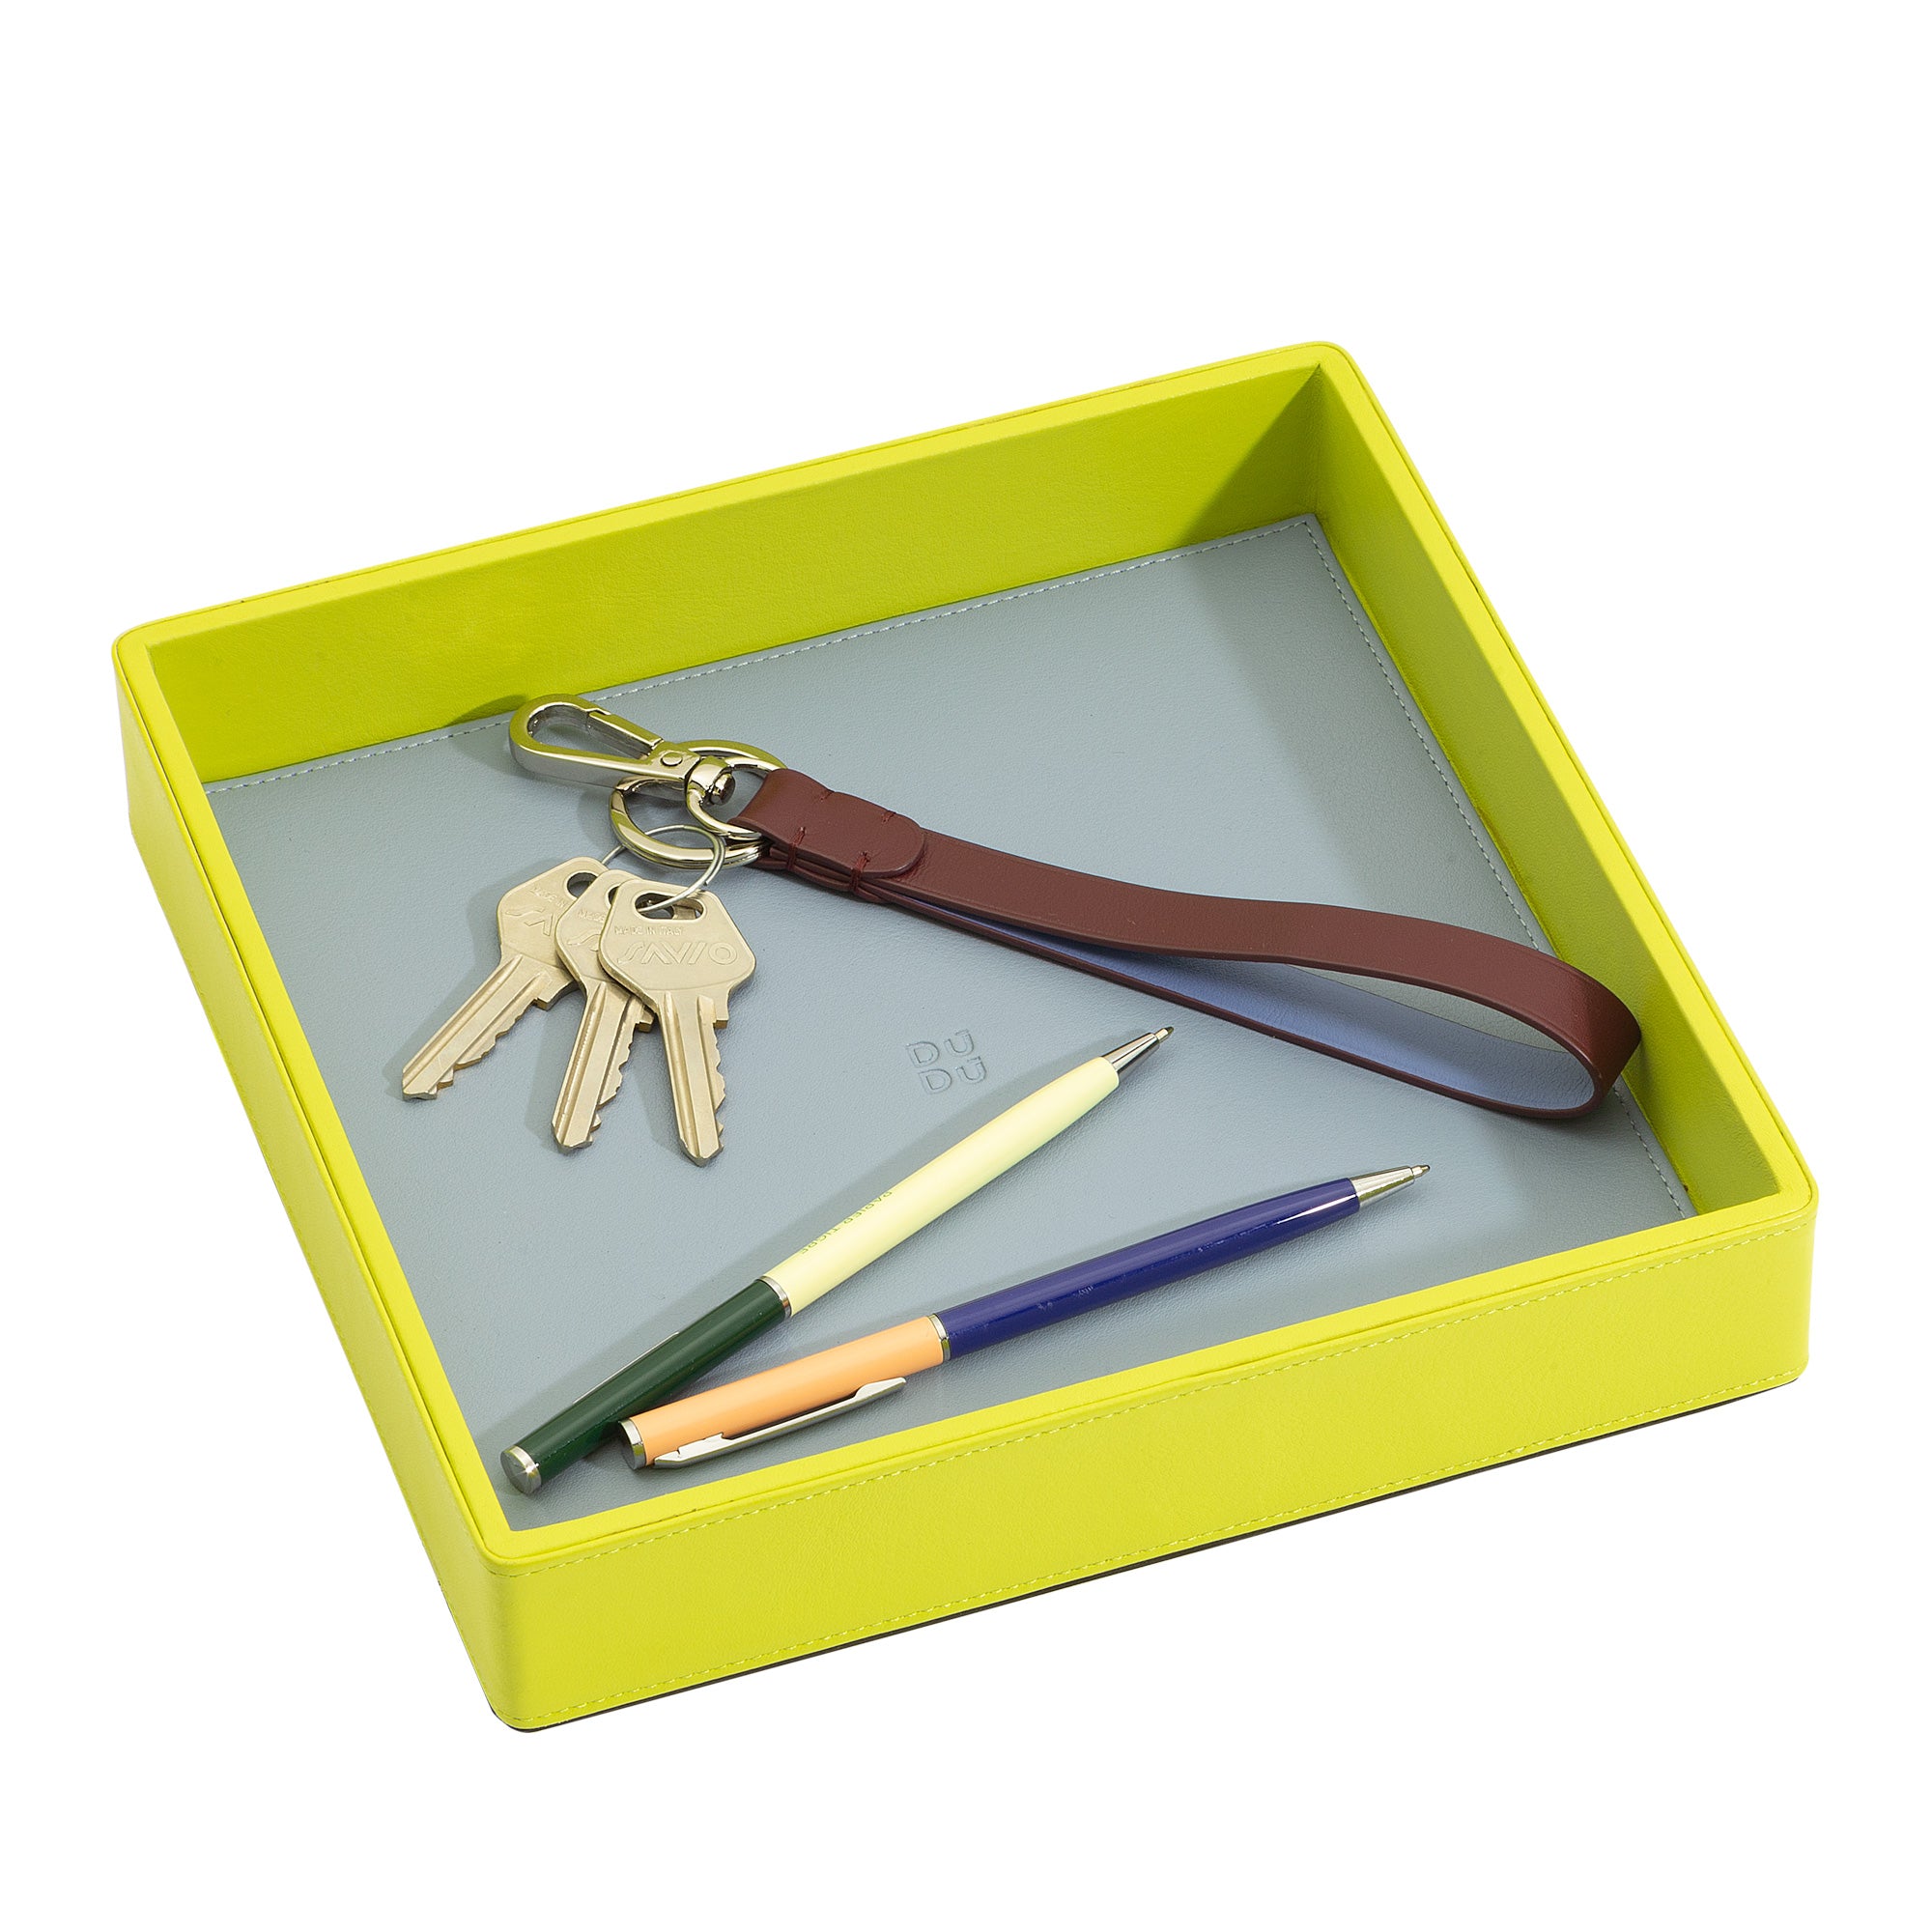 DuDu Colorful Valet tray - Artisia Store